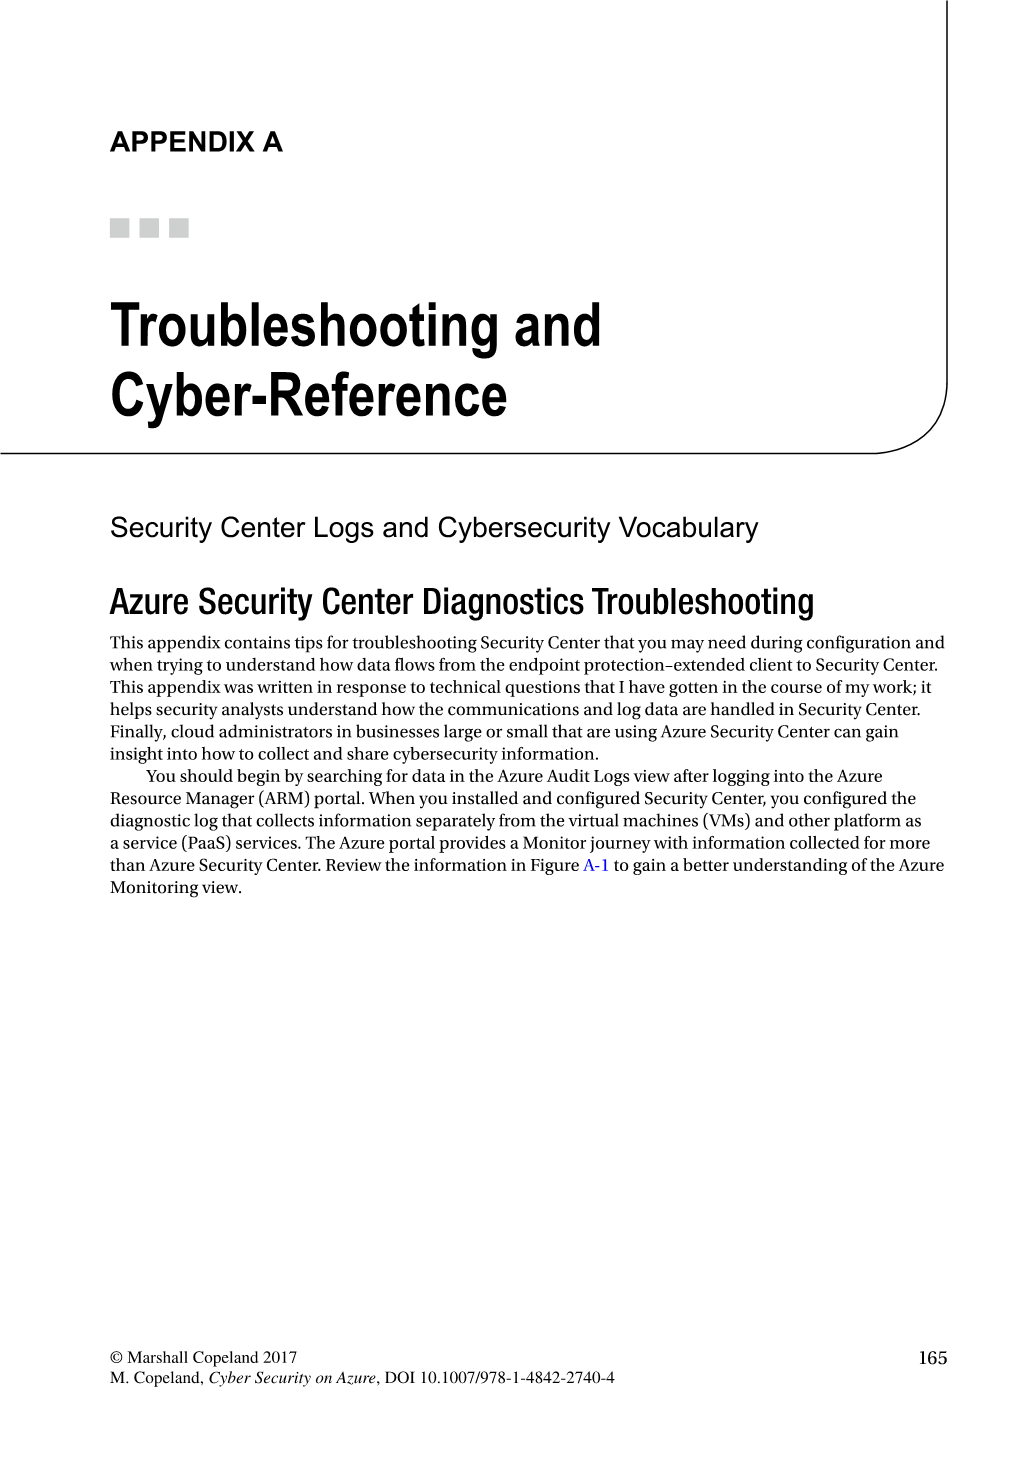 Troubleshooting and Cyber-Reference